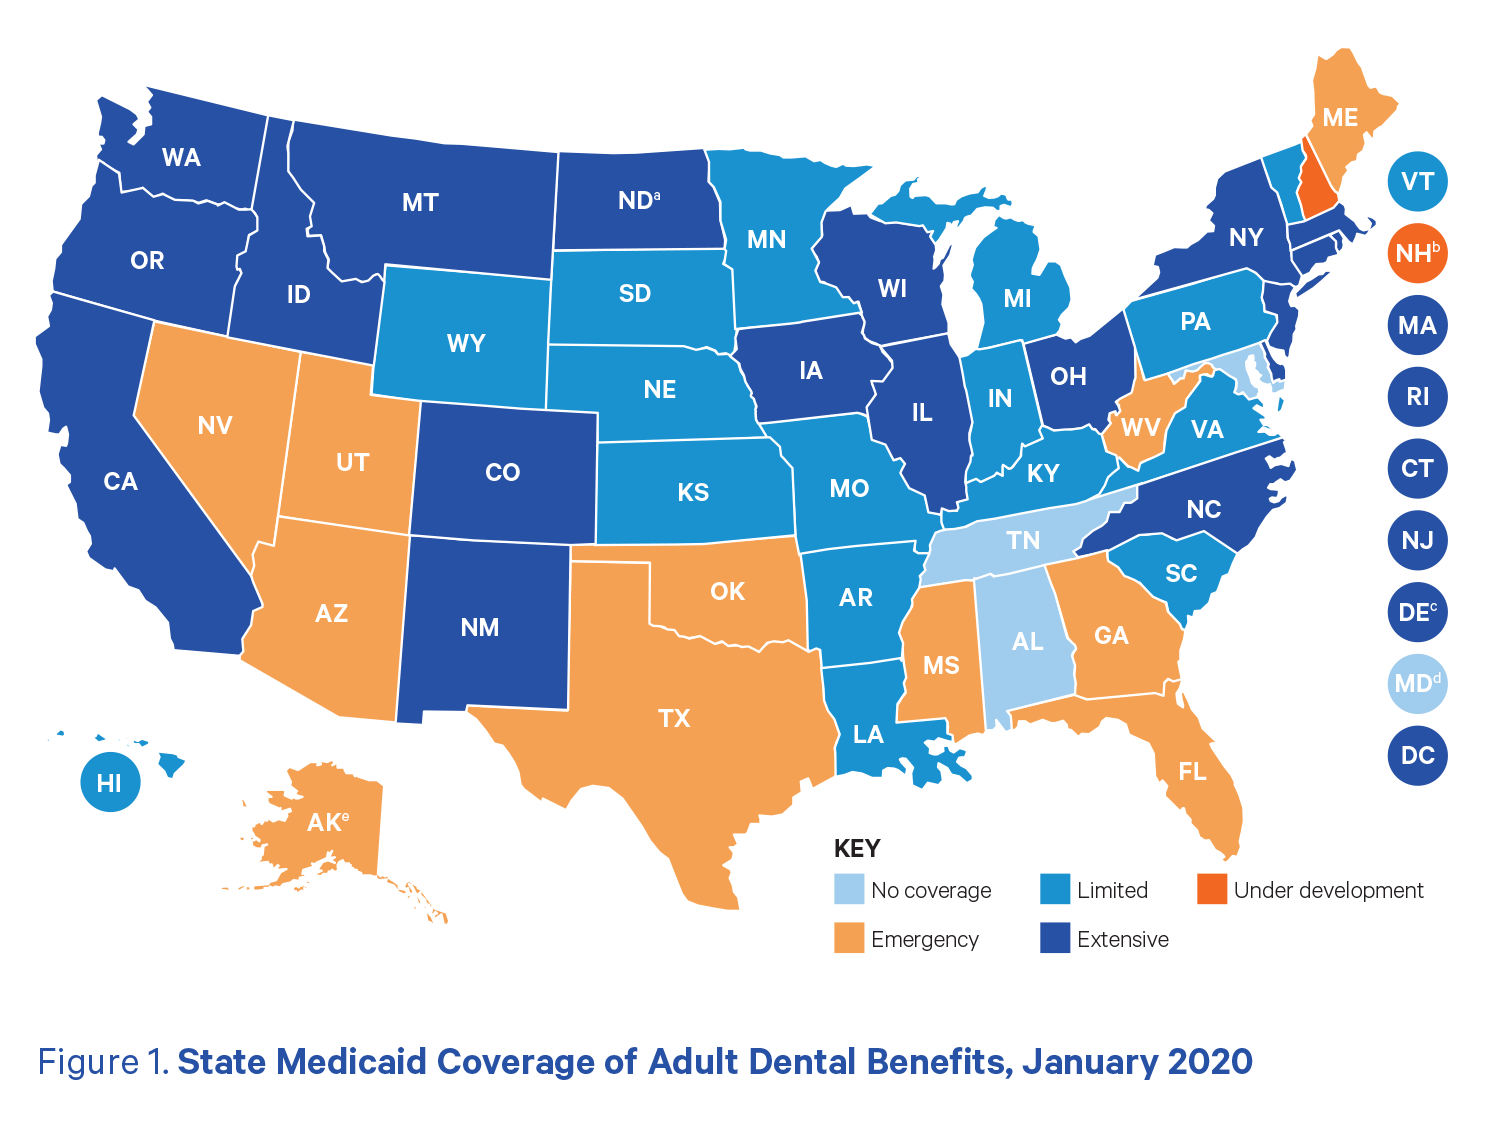 United states map of state medicaid coverage for adult dental benefit